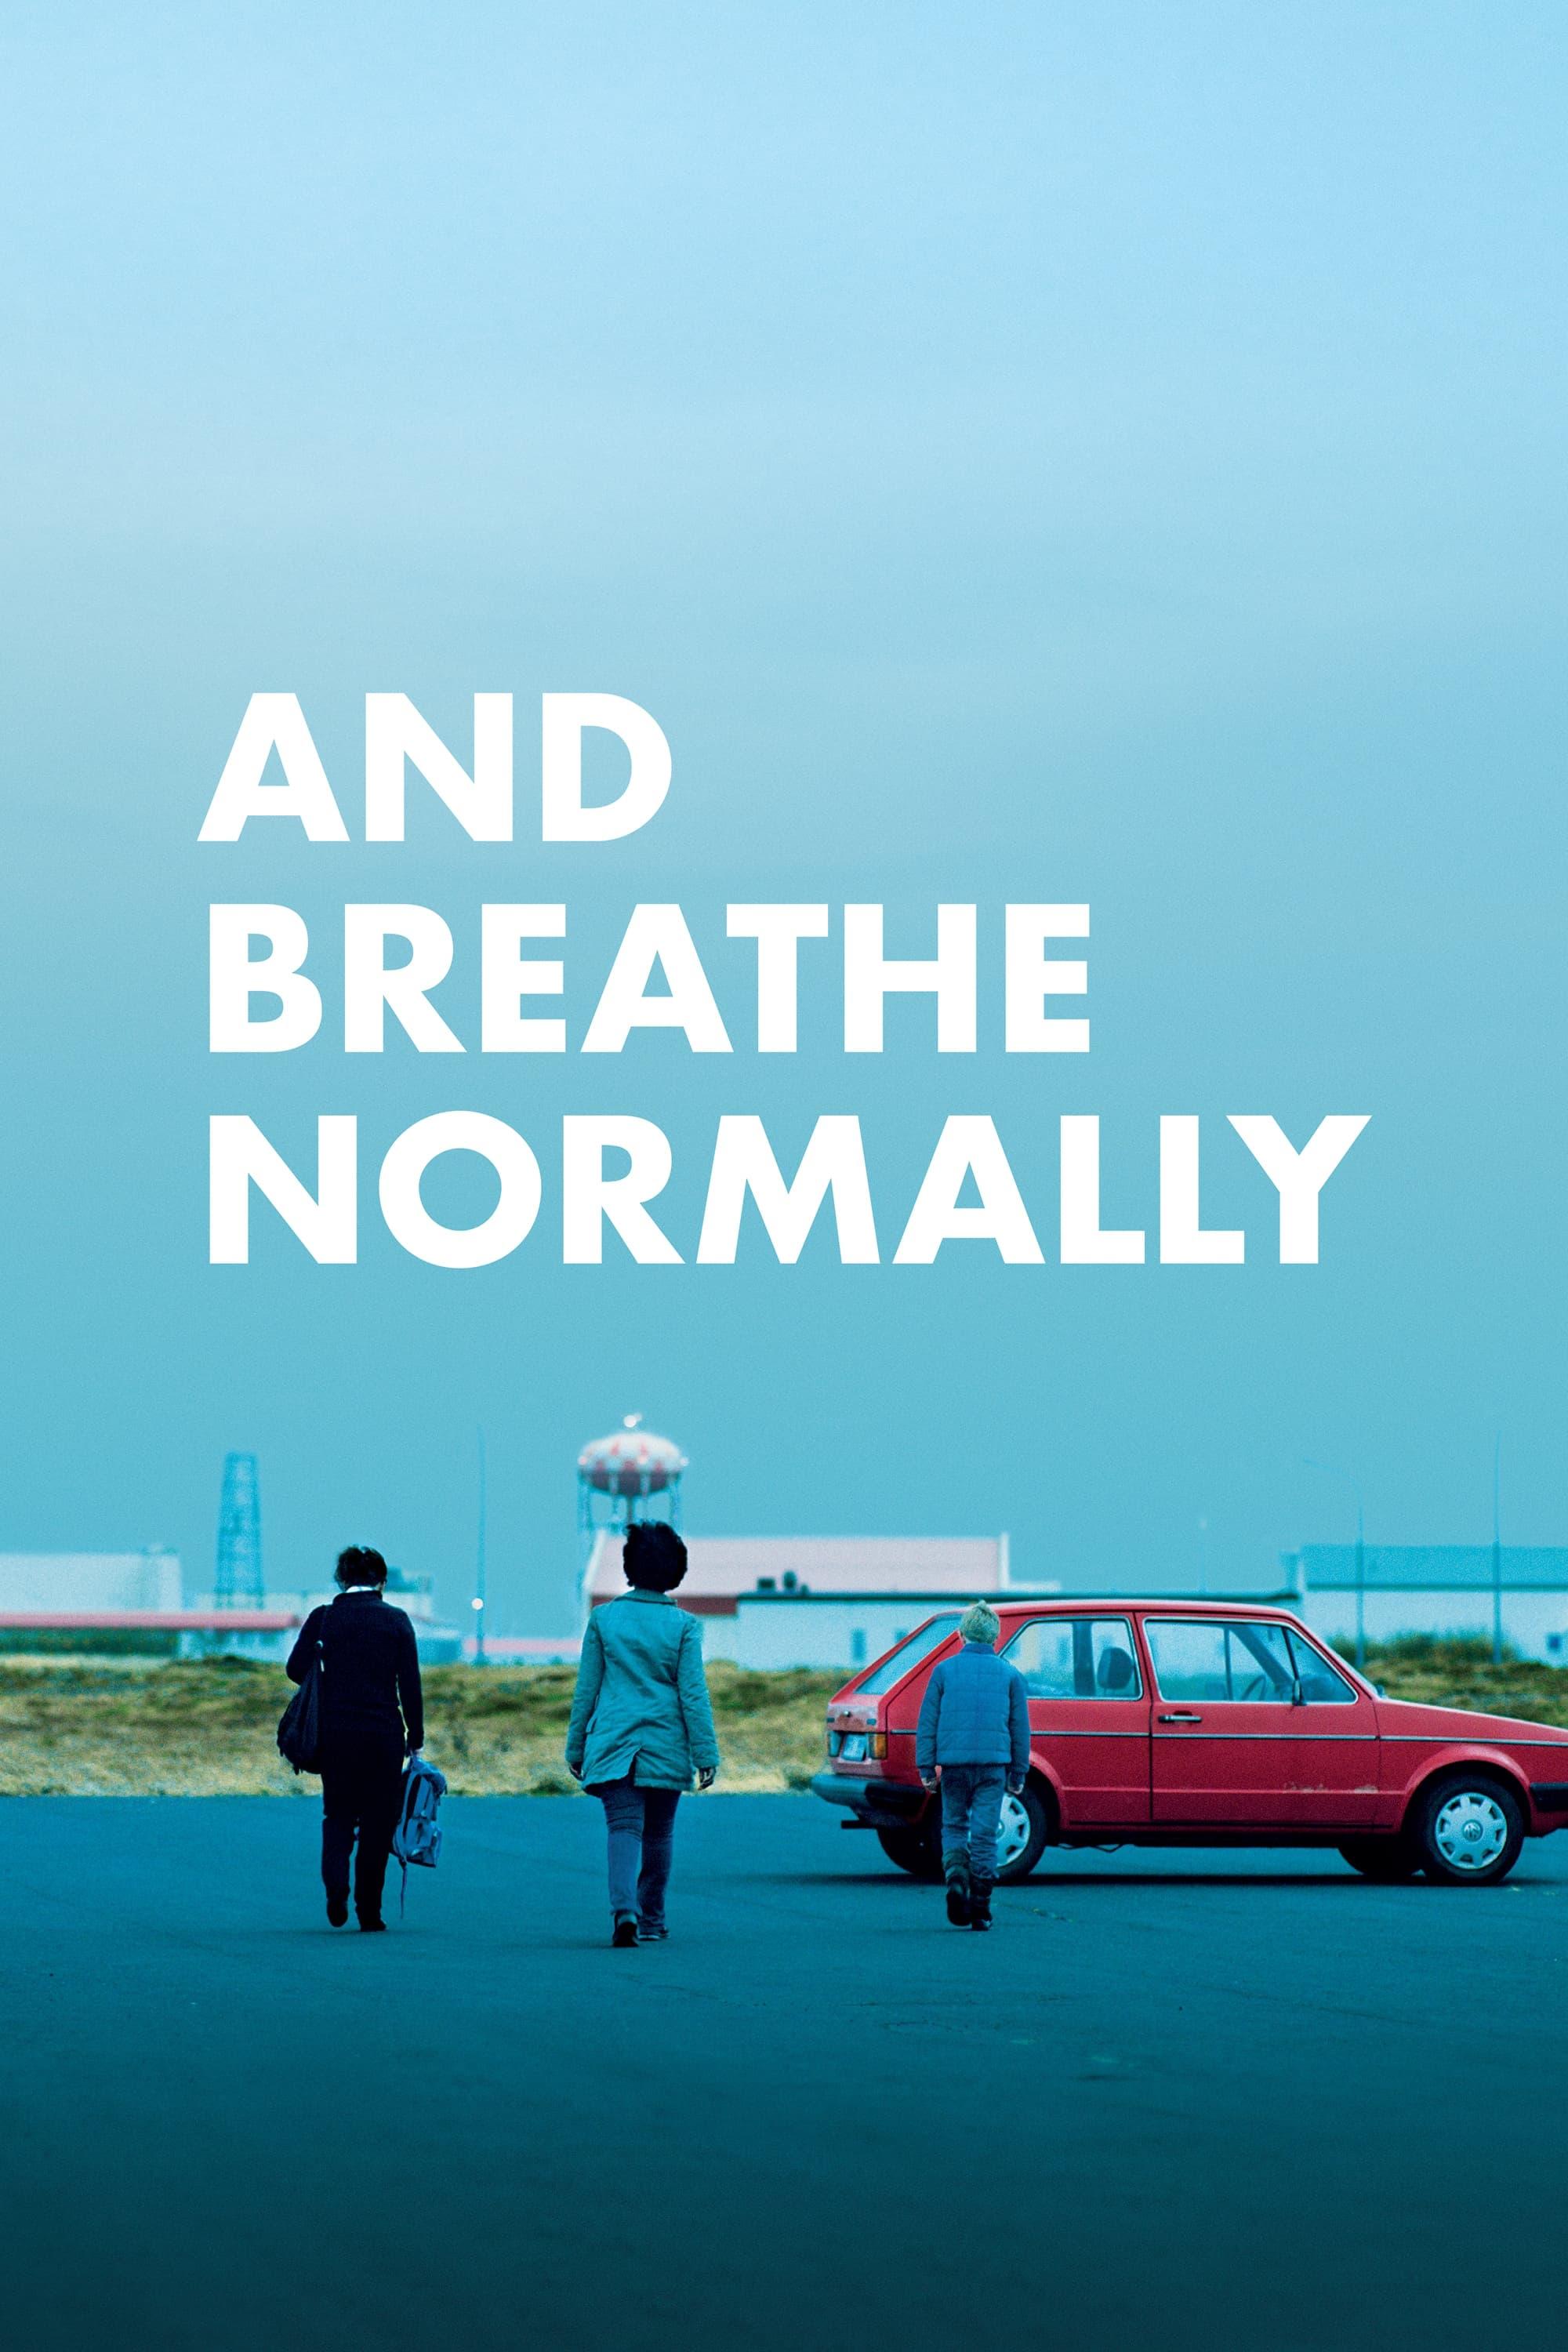 And Breathe Normally poster